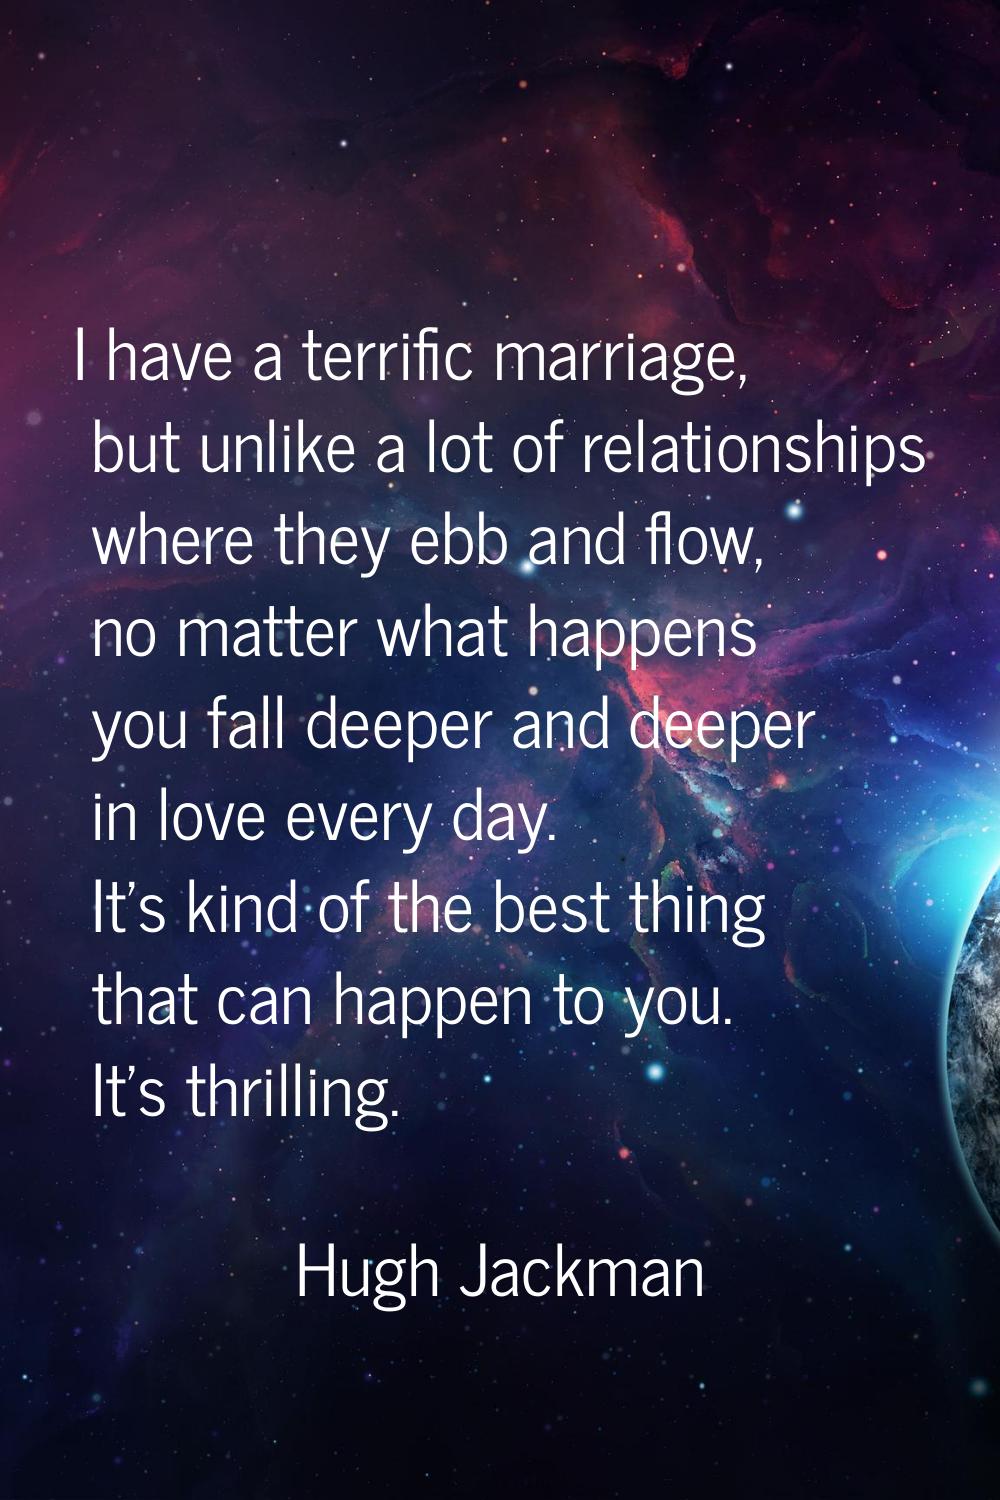 I have a terrific marriage, but unlike a lot of relationships where they ebb and flow, no matter wh